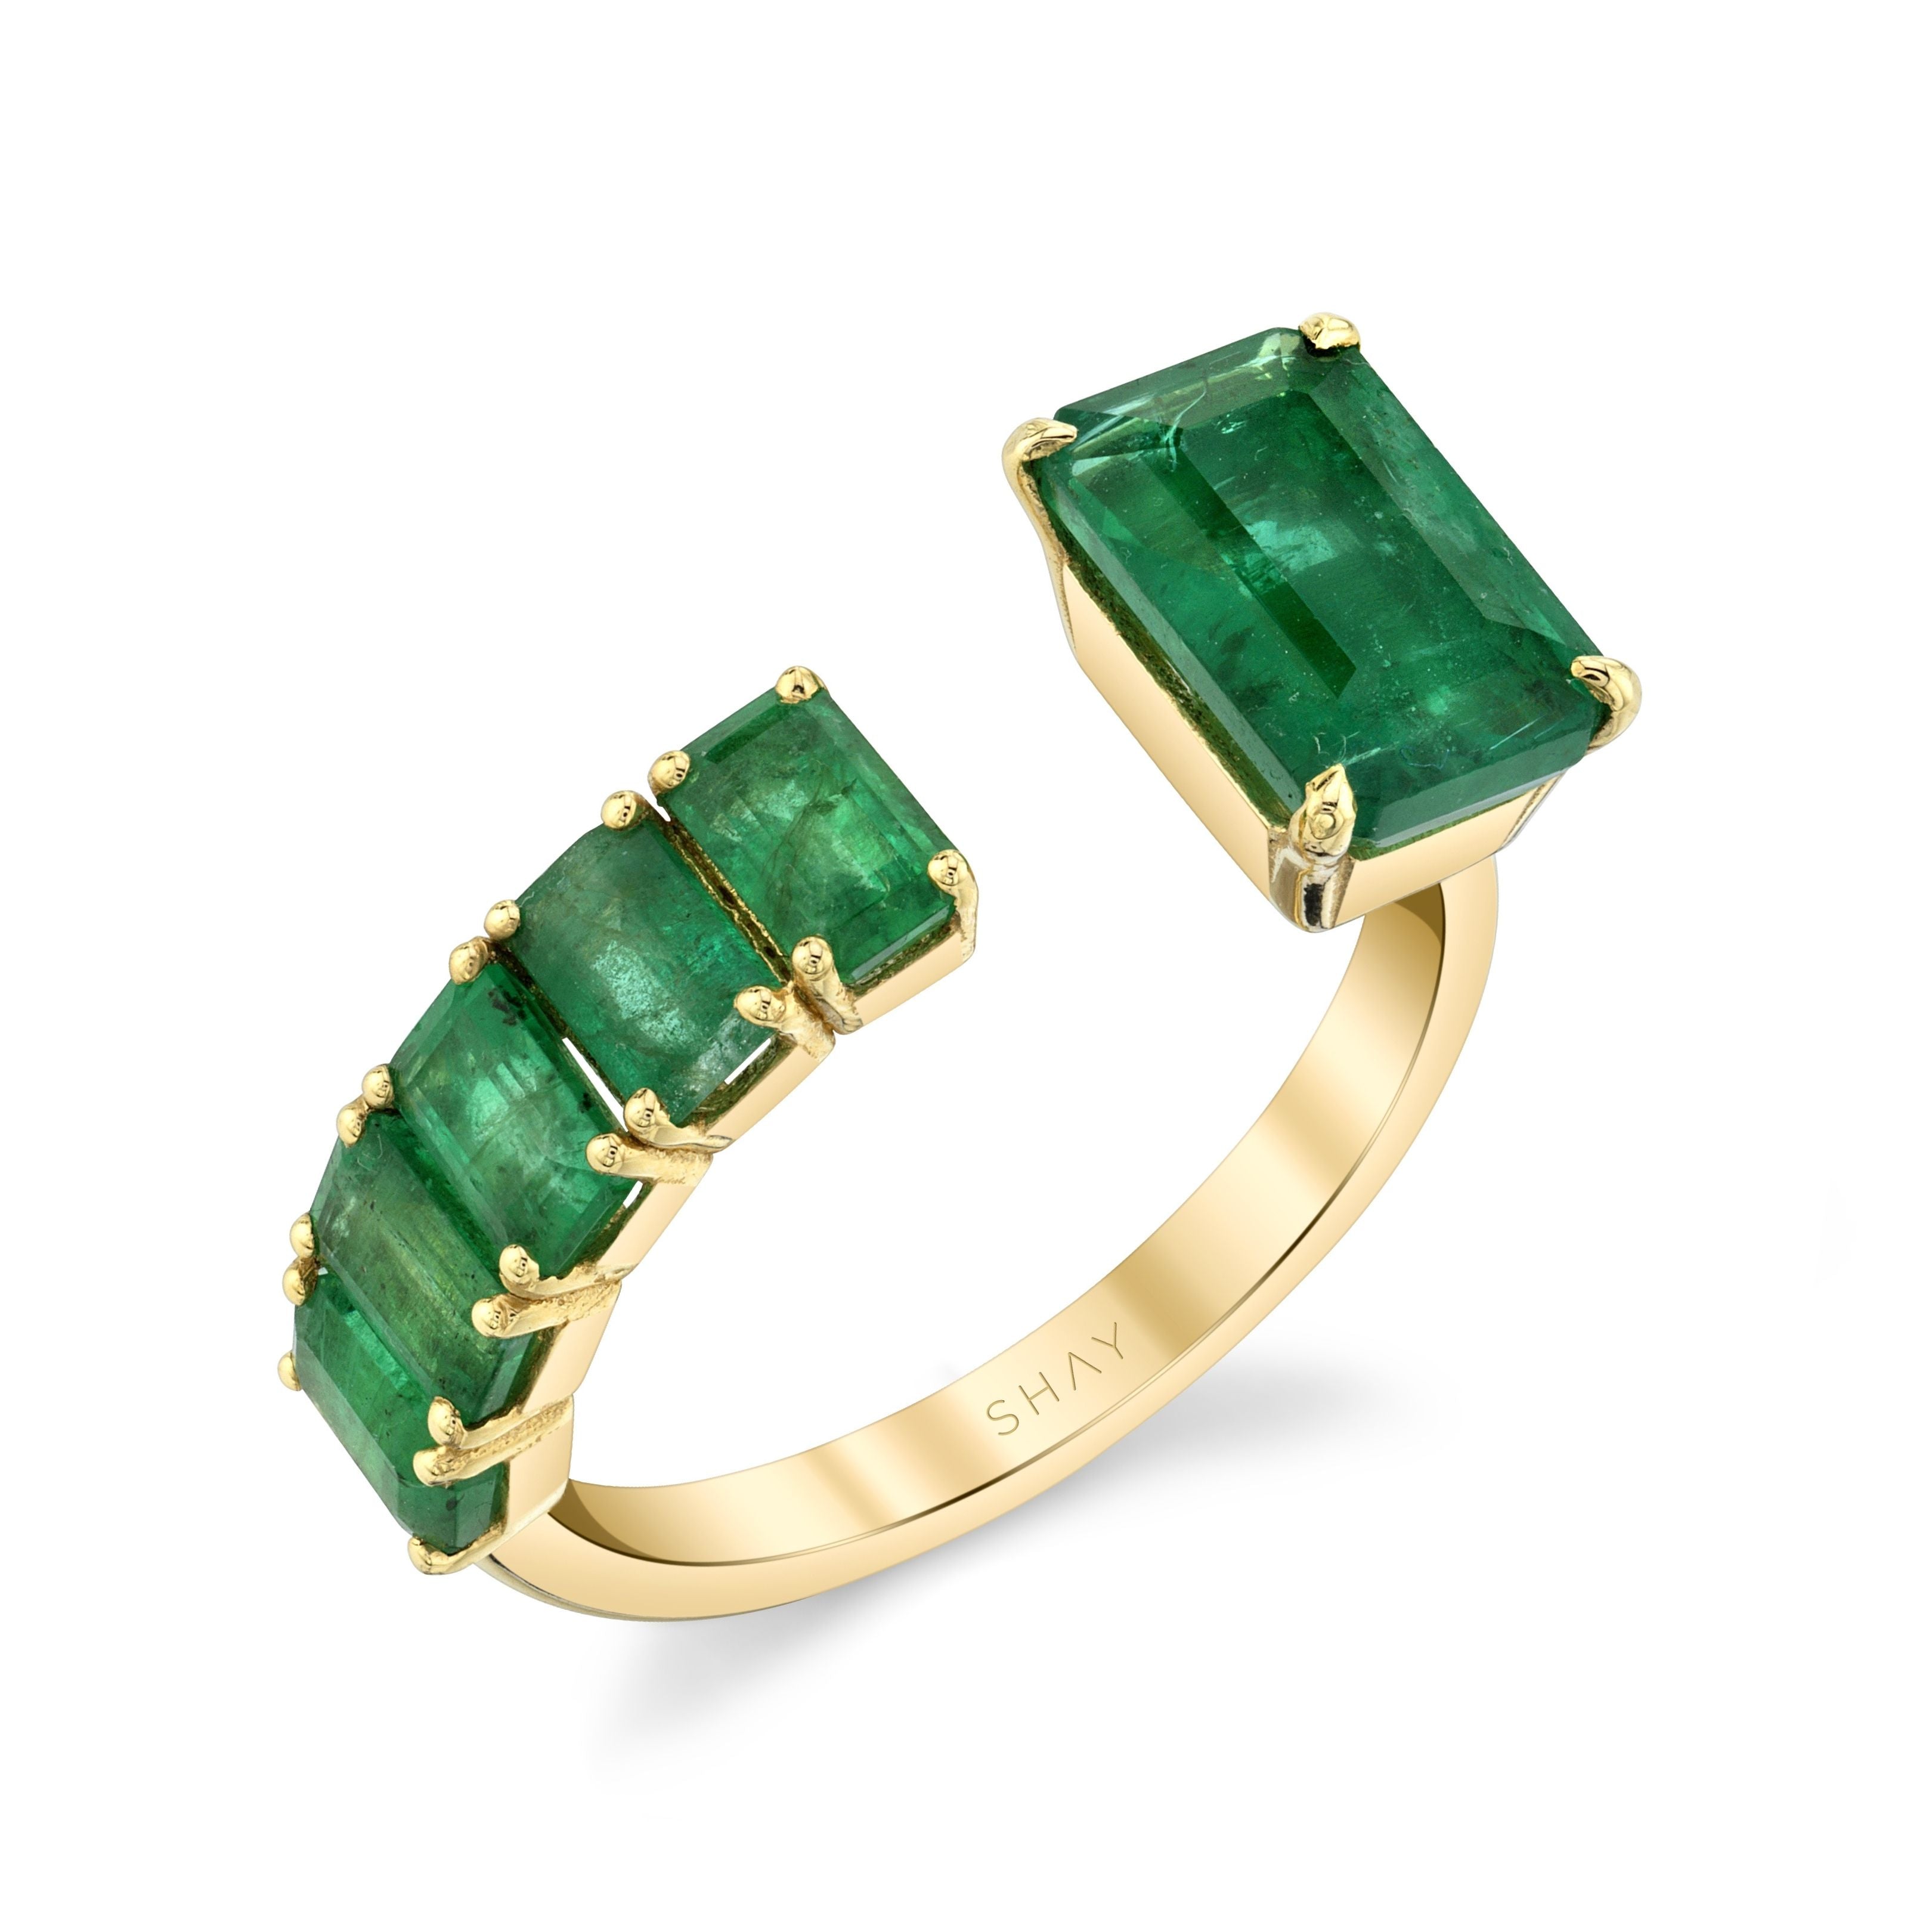 Natural Emerald Gemstone Chevron Ring in 14k Real Yellow Gold